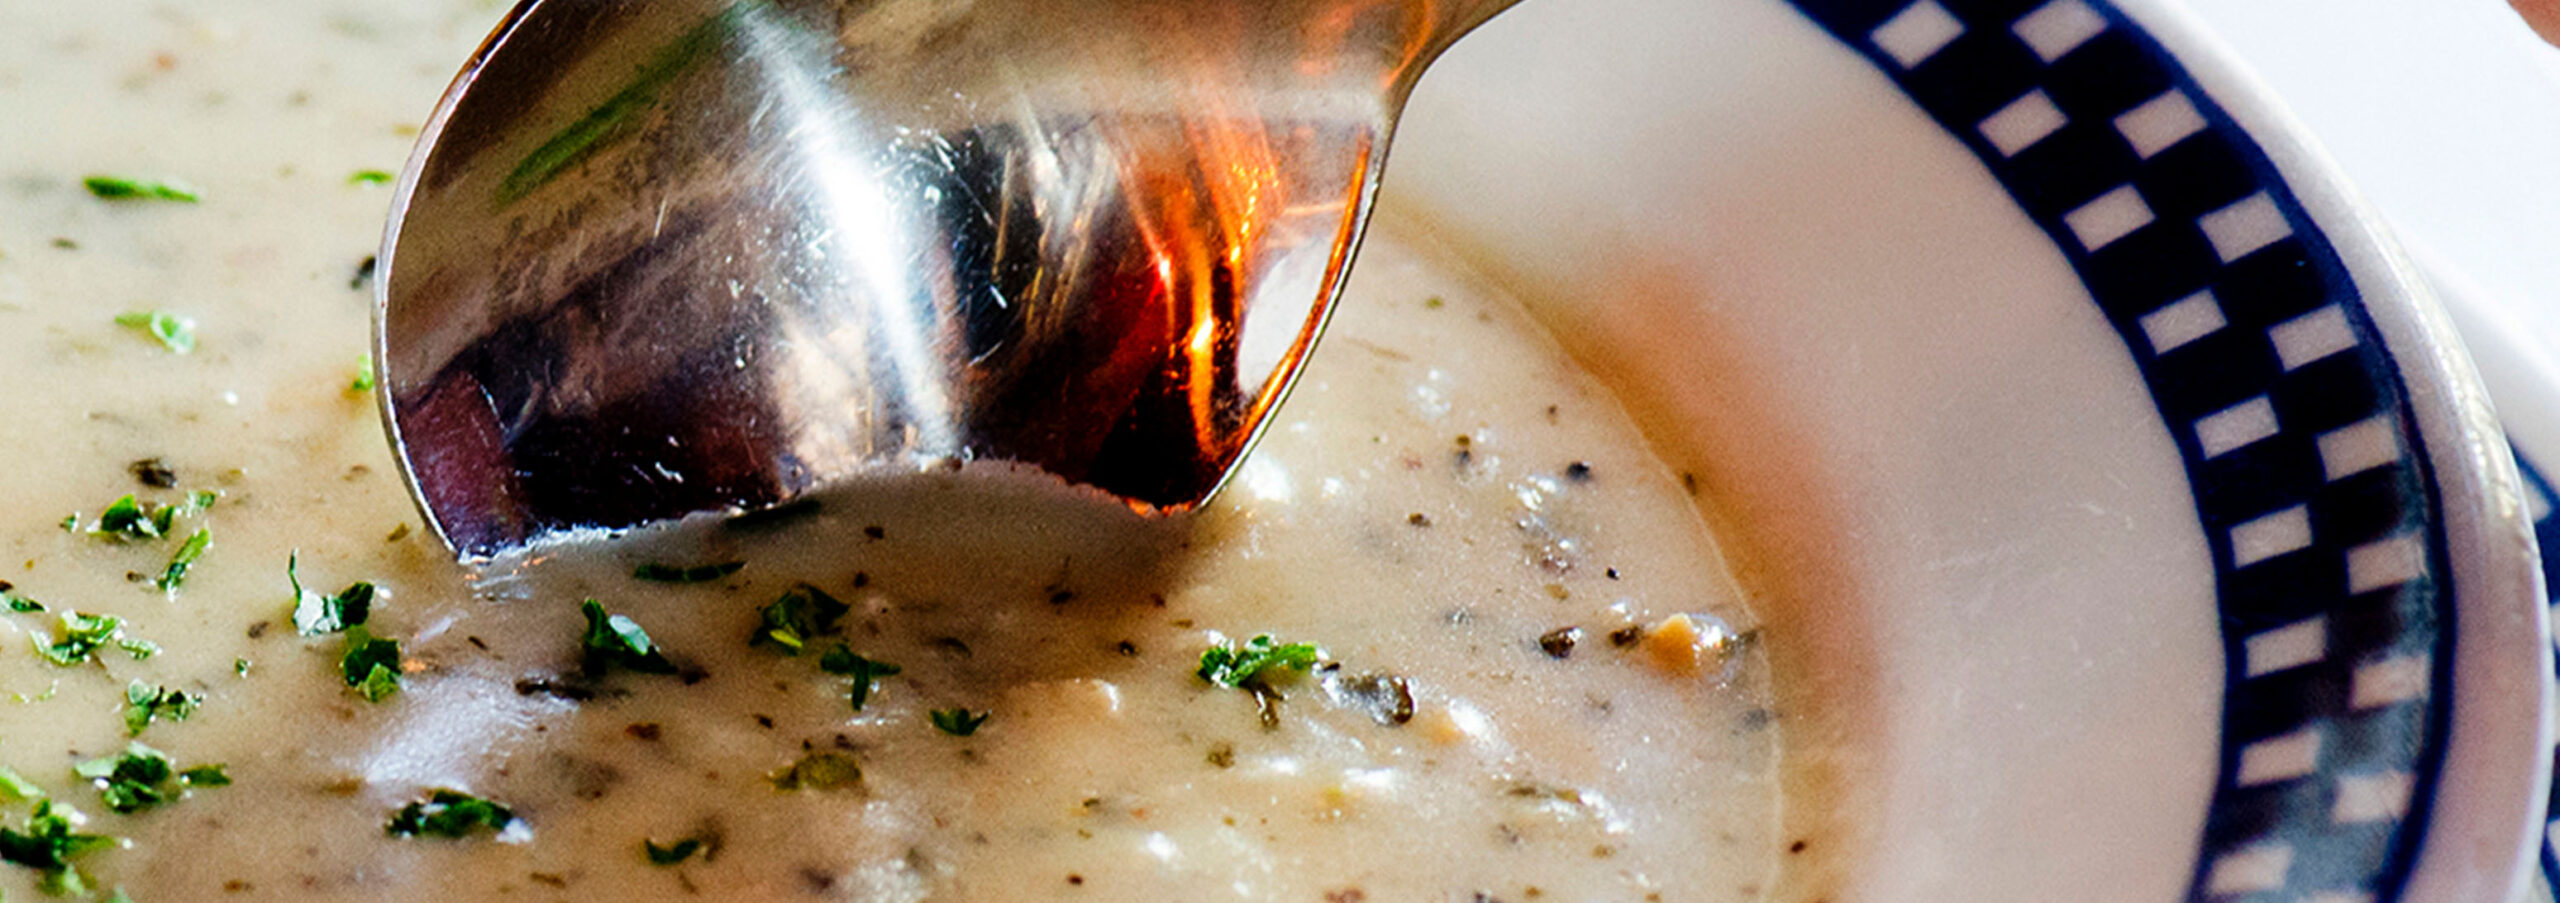 Bowl of Dukes Seafood Chowder